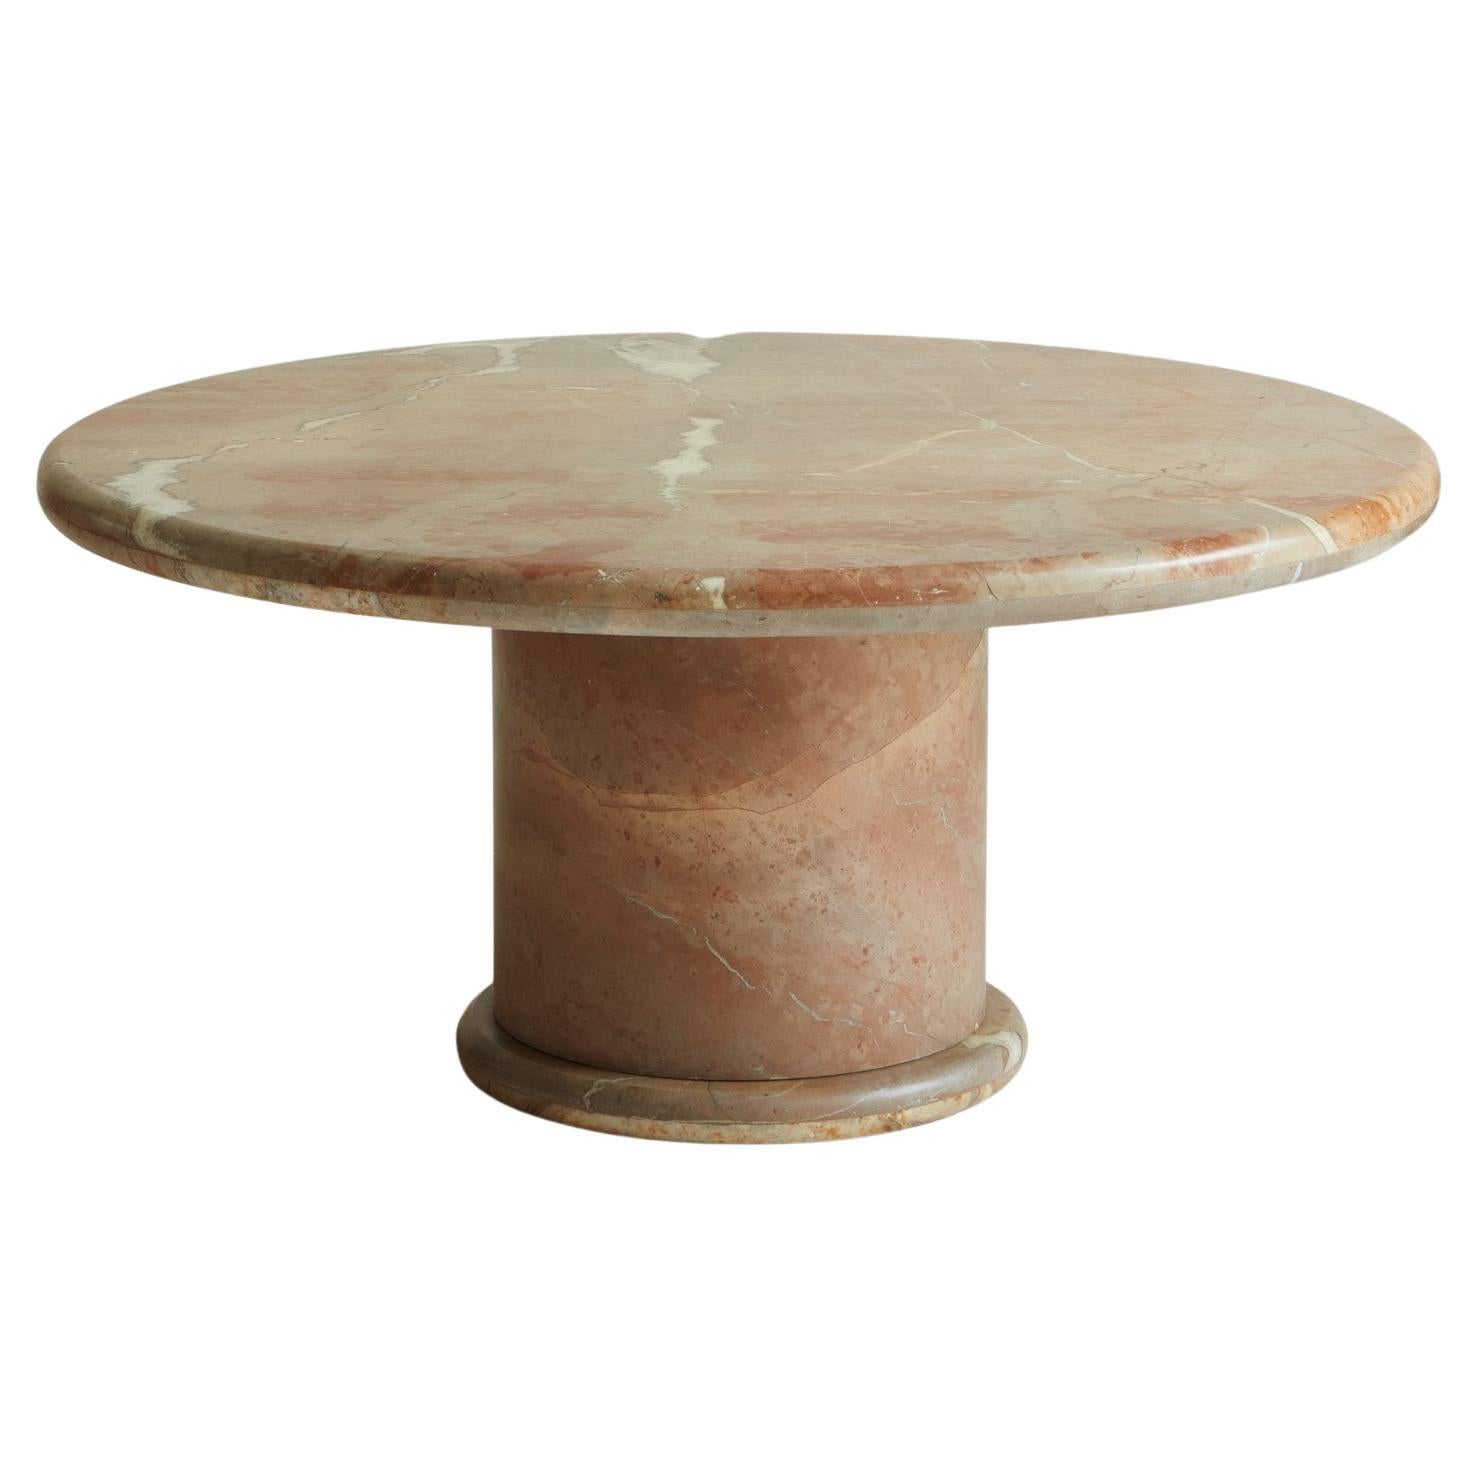 Round Rojo Alicante Marble Coffee Table with Circular Banded Base, Spain 1988